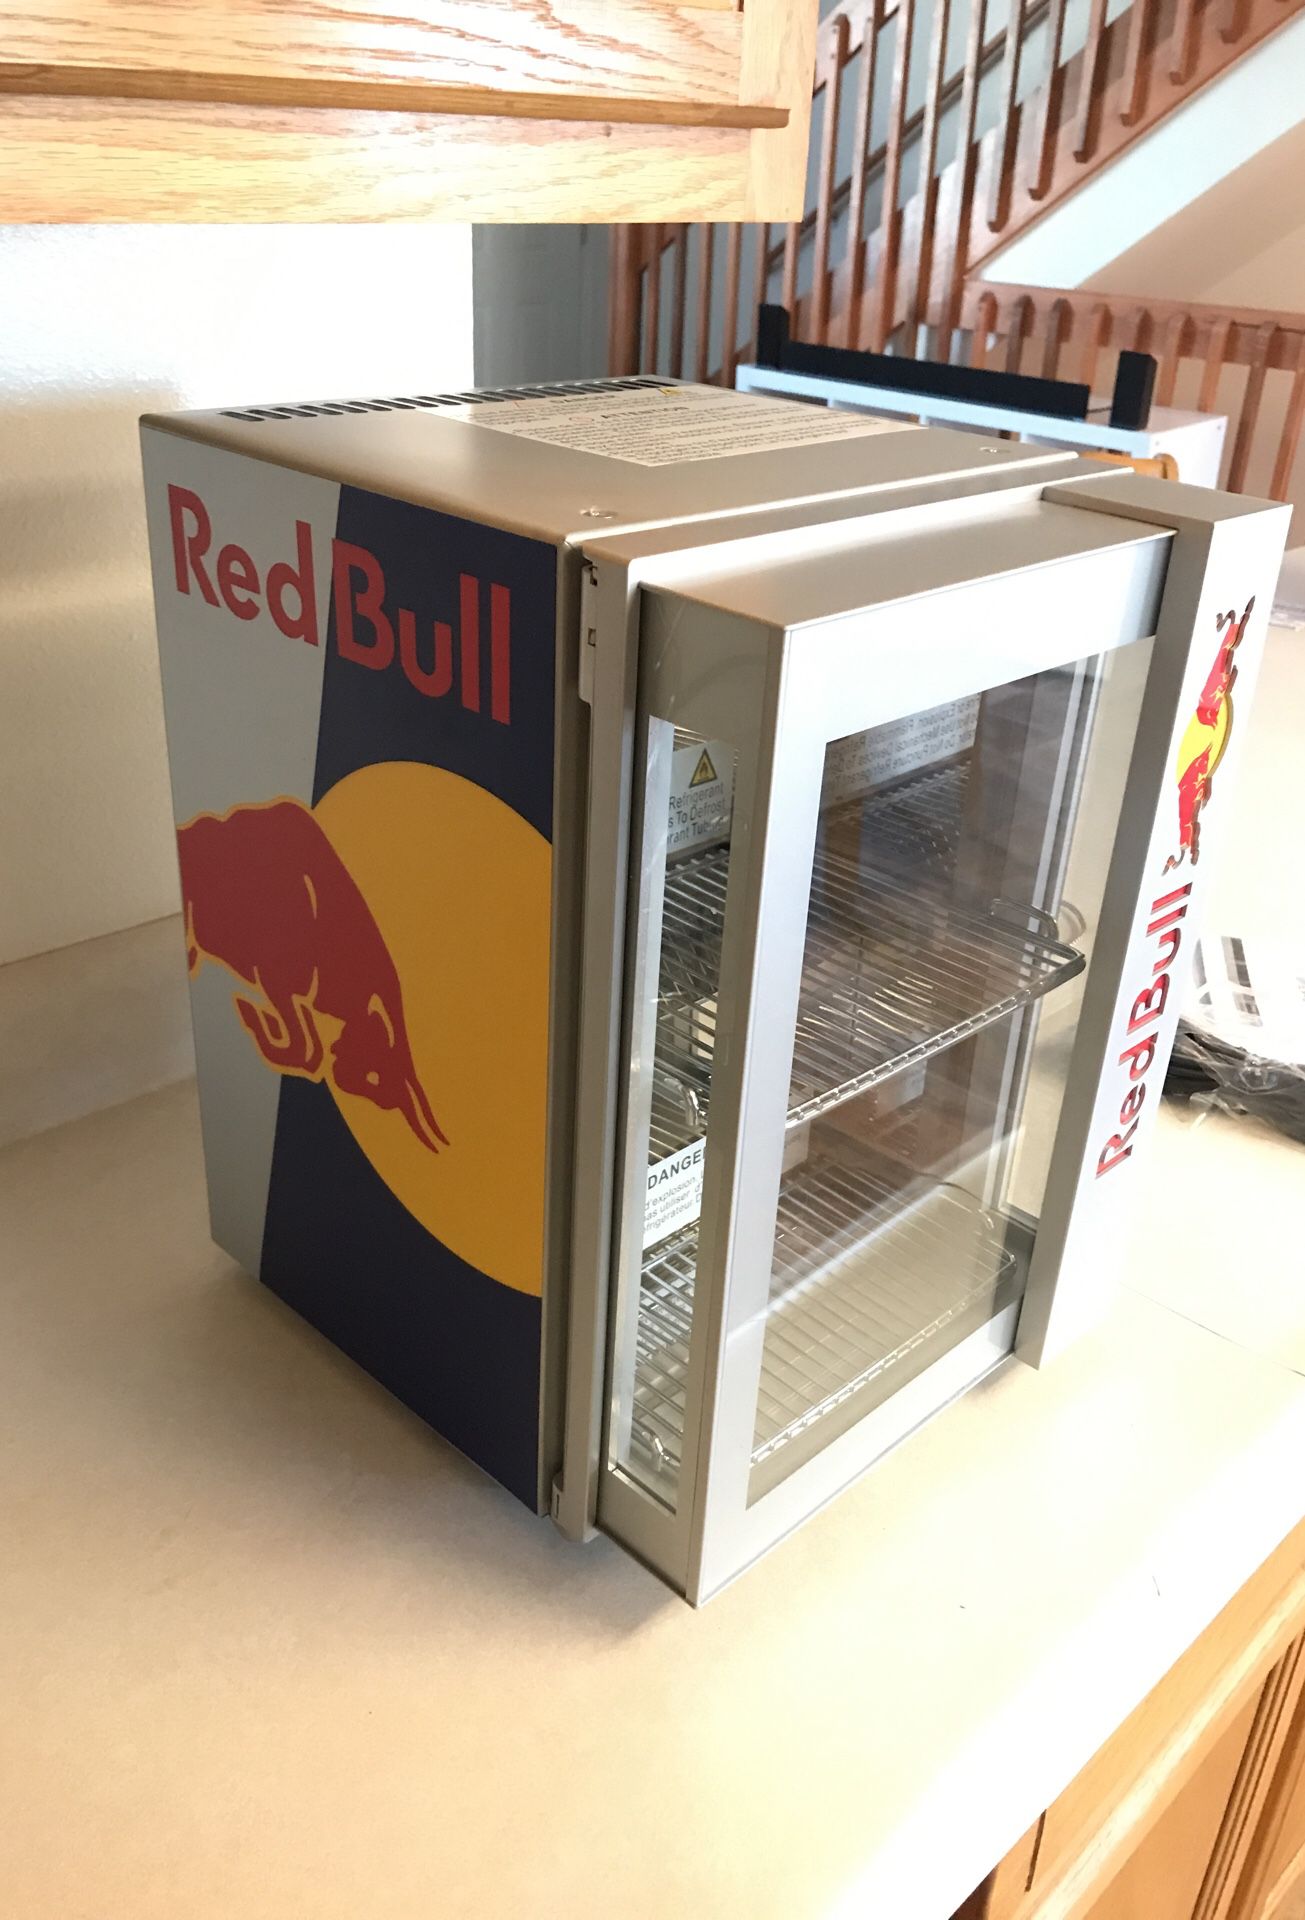 Red Bull baby cooler 2020 for Sale in Murrieta, CA - OfferUp